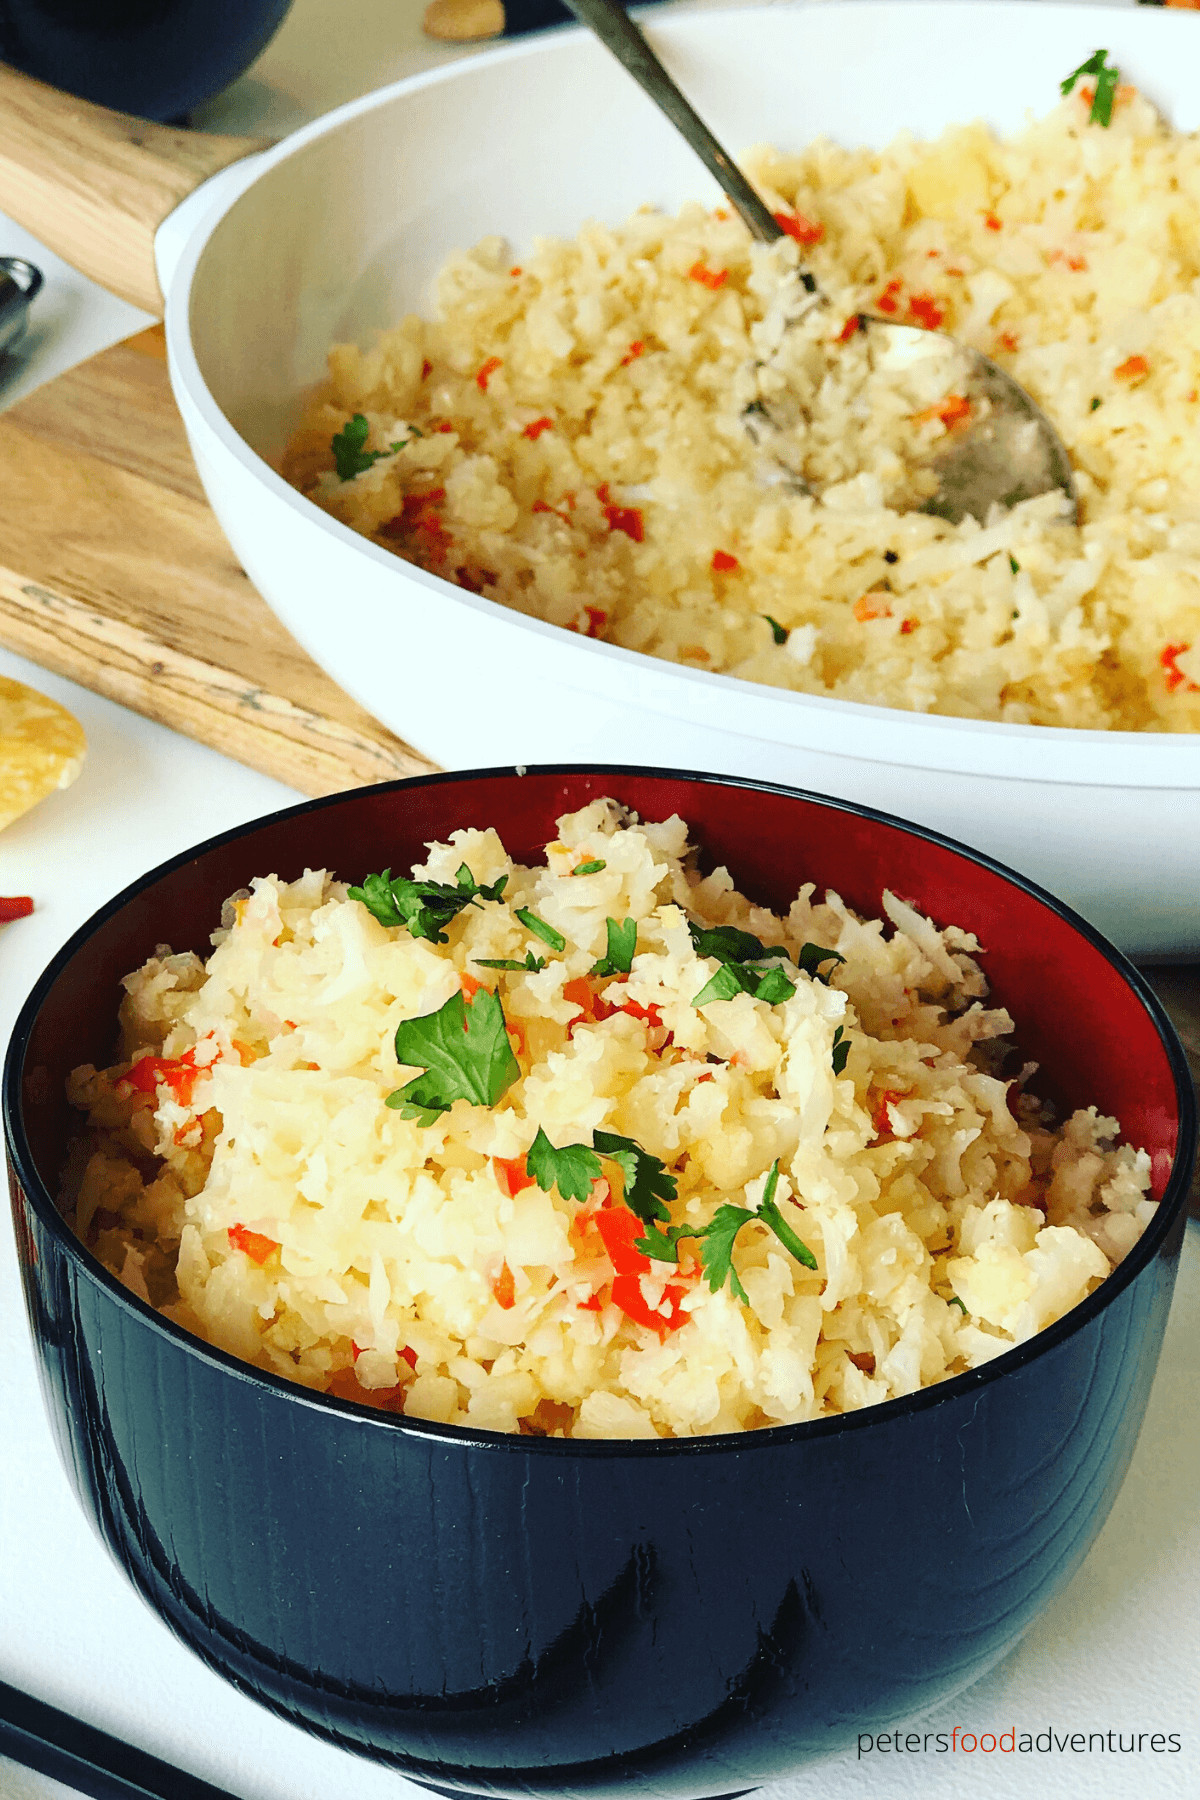 Thai Cauliflower Rice recipe is a side dish packed with flavor, you won't miss the carbs on your plate! It's gluten free, low carb, paleo and pescatarian. But you'd never know it was any anything else but delicious!